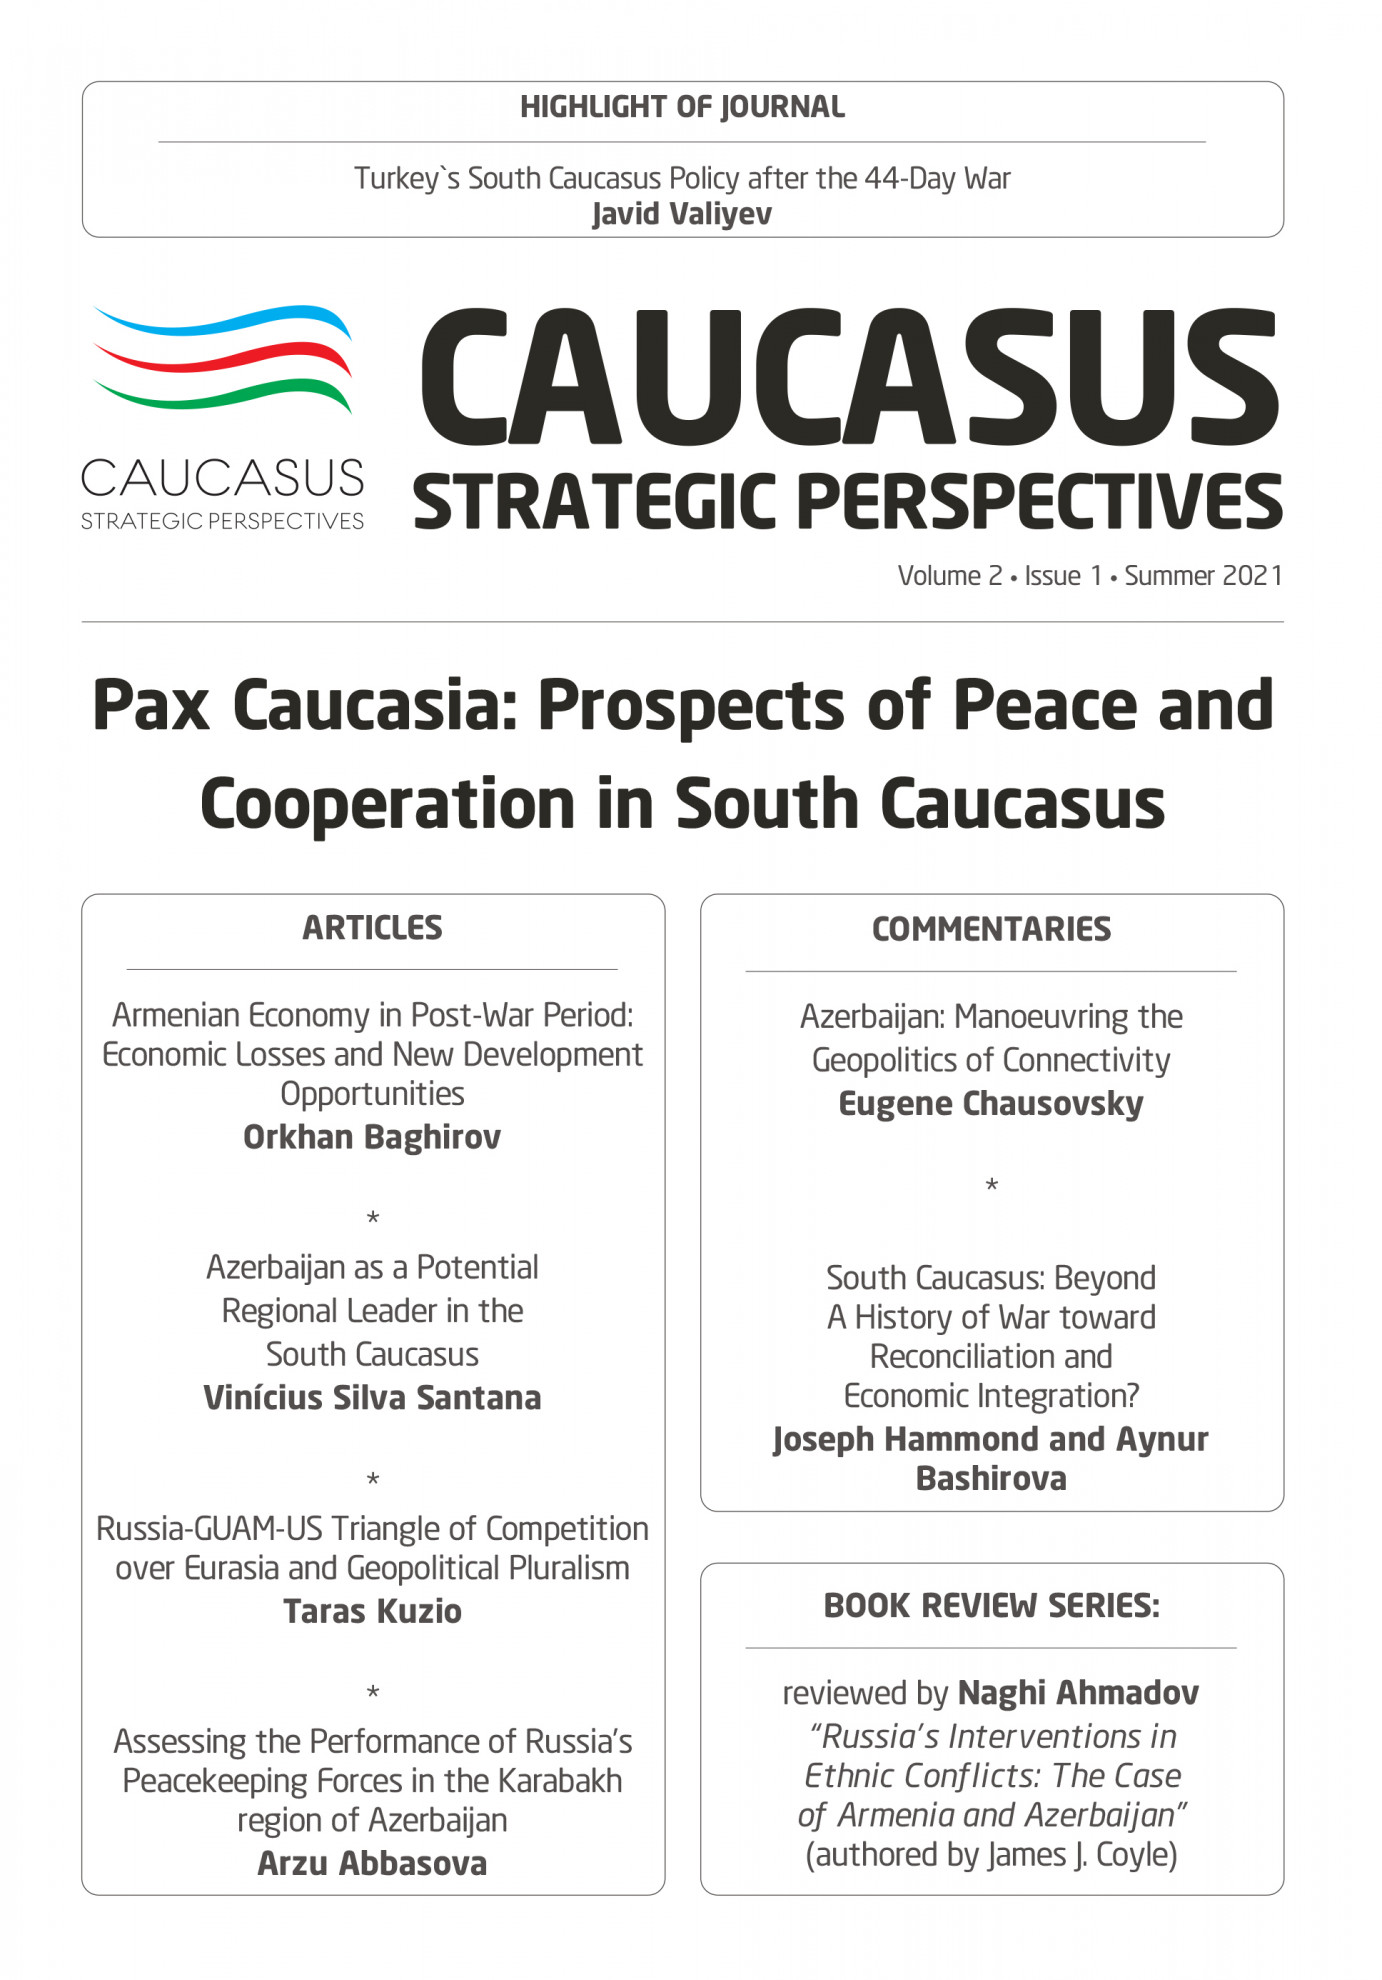 A new issue of the Journal of Caucasus Strategic Perspectives has been released